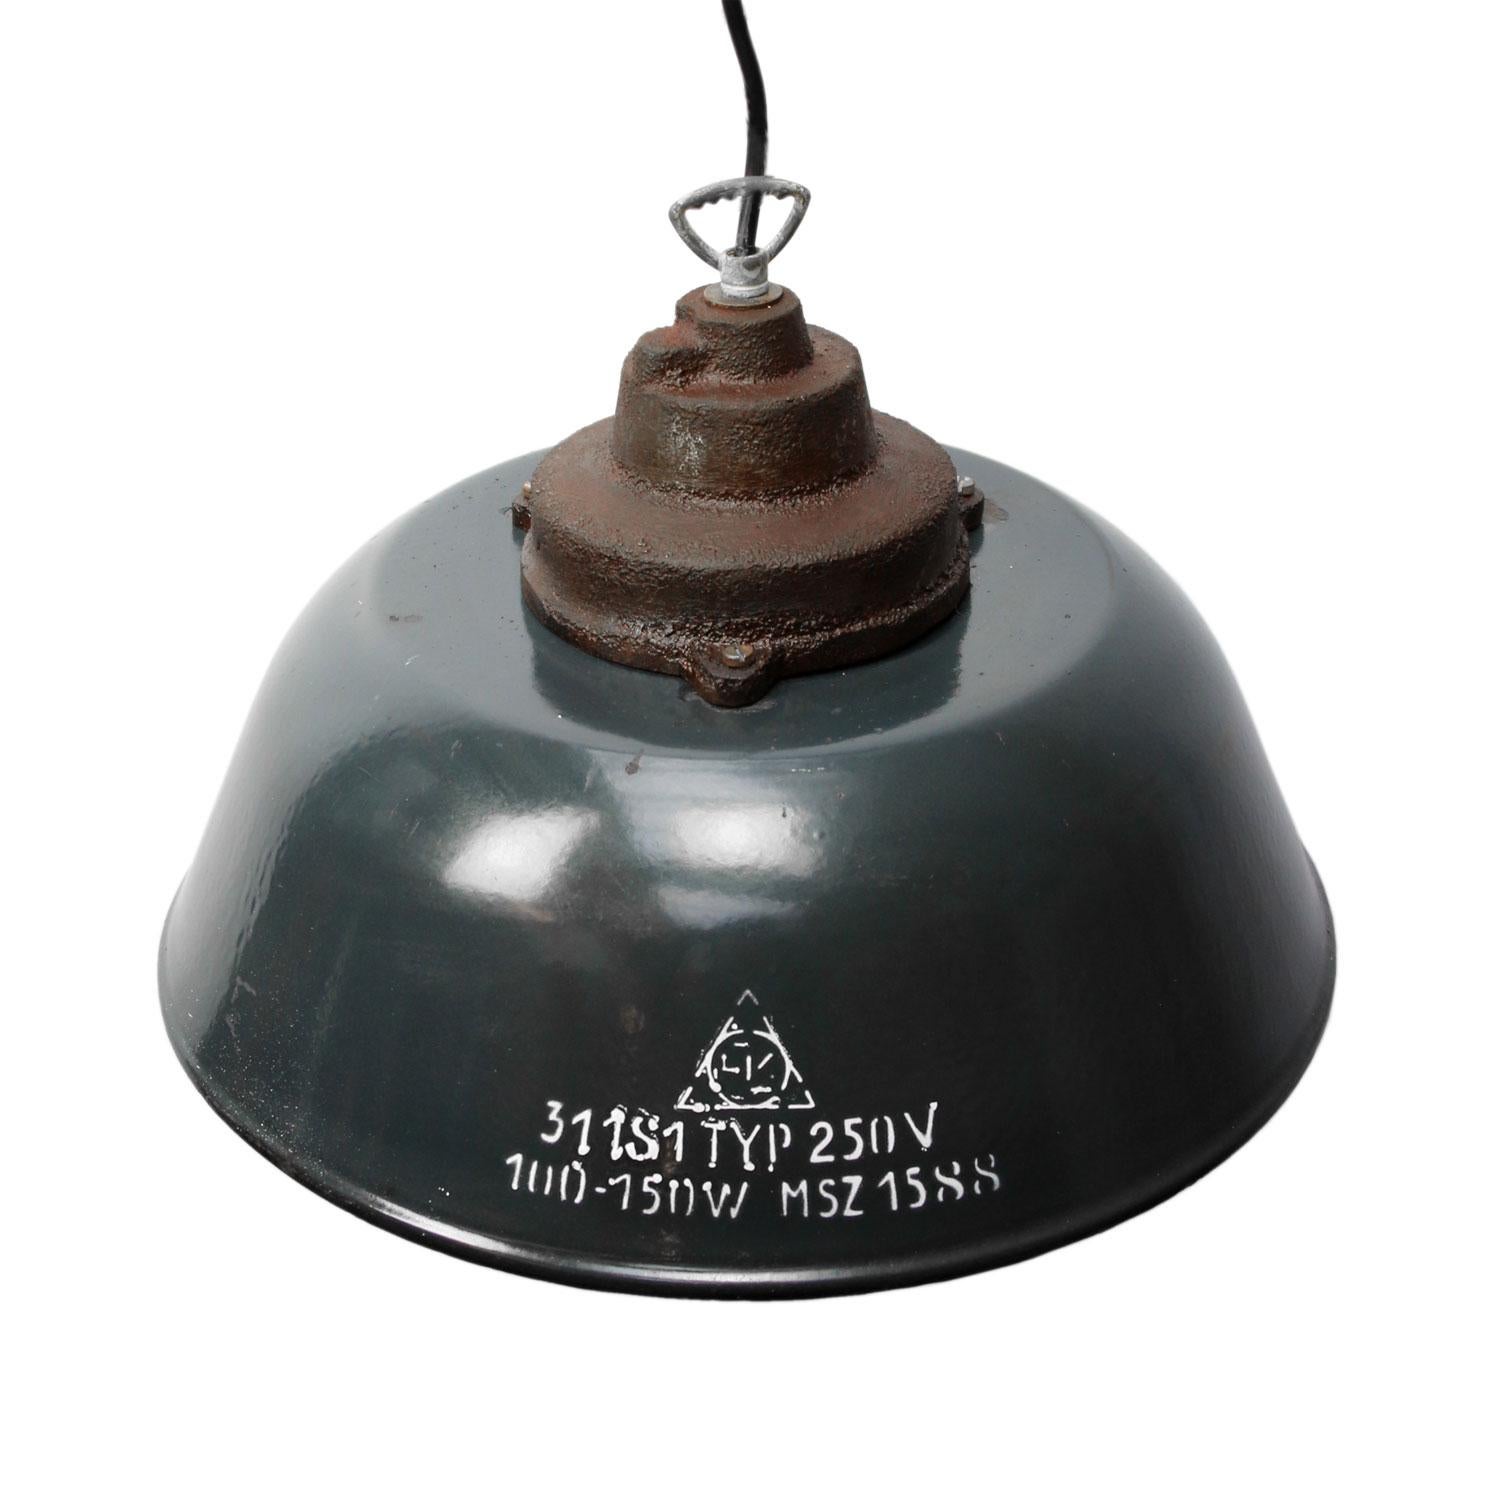 Factory pendant
dark blue enamel with white interior
white typography on outside
cast iron top.

Measures: Weight 3.20 kg / 7.1 lb

Priced per individual item. All lamps have been made suitable by international standards for incandescent